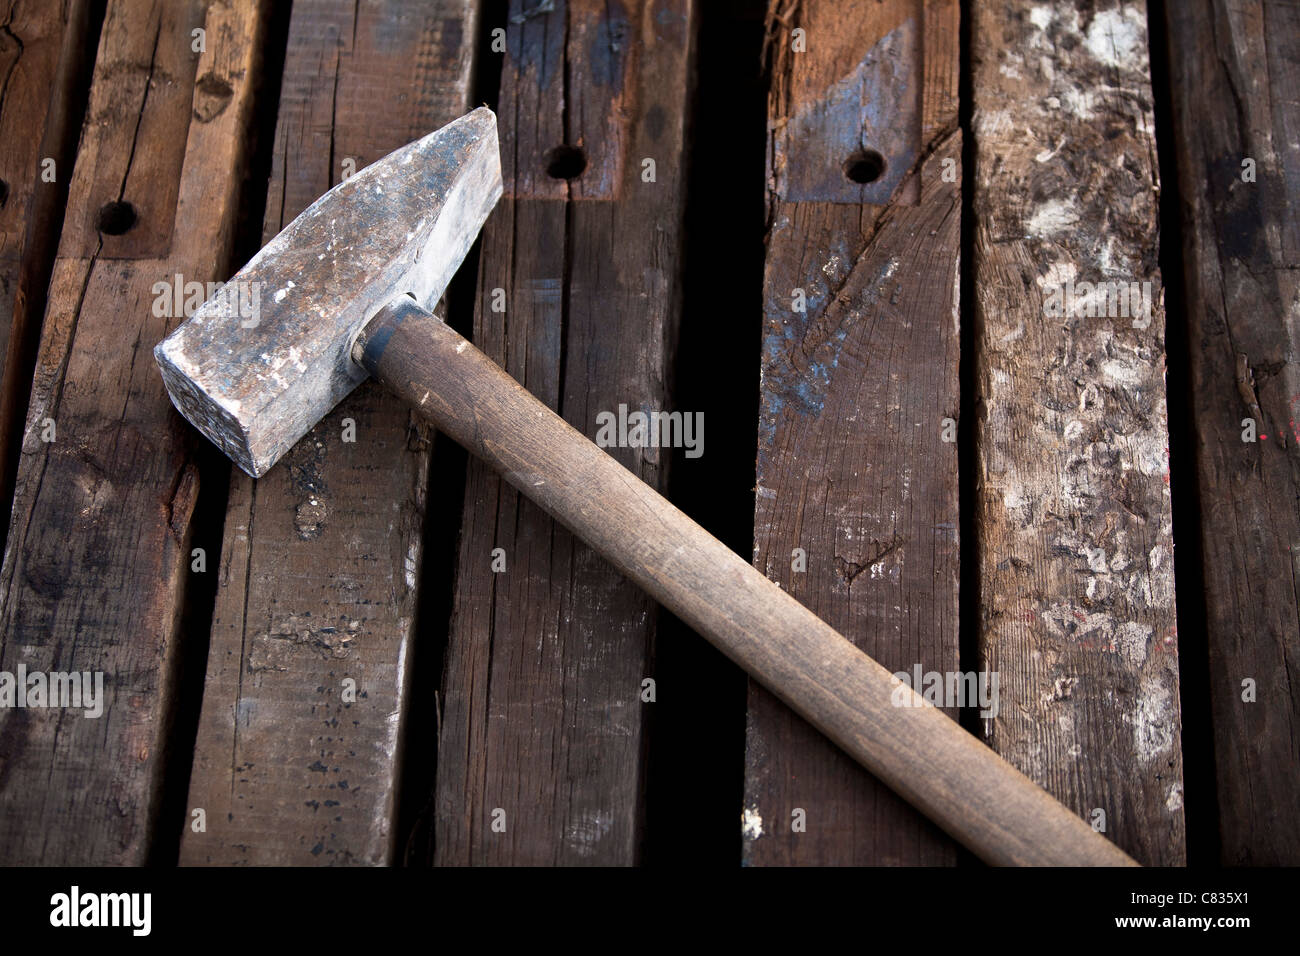 Hammer laying on the wooden beams Stock Photo